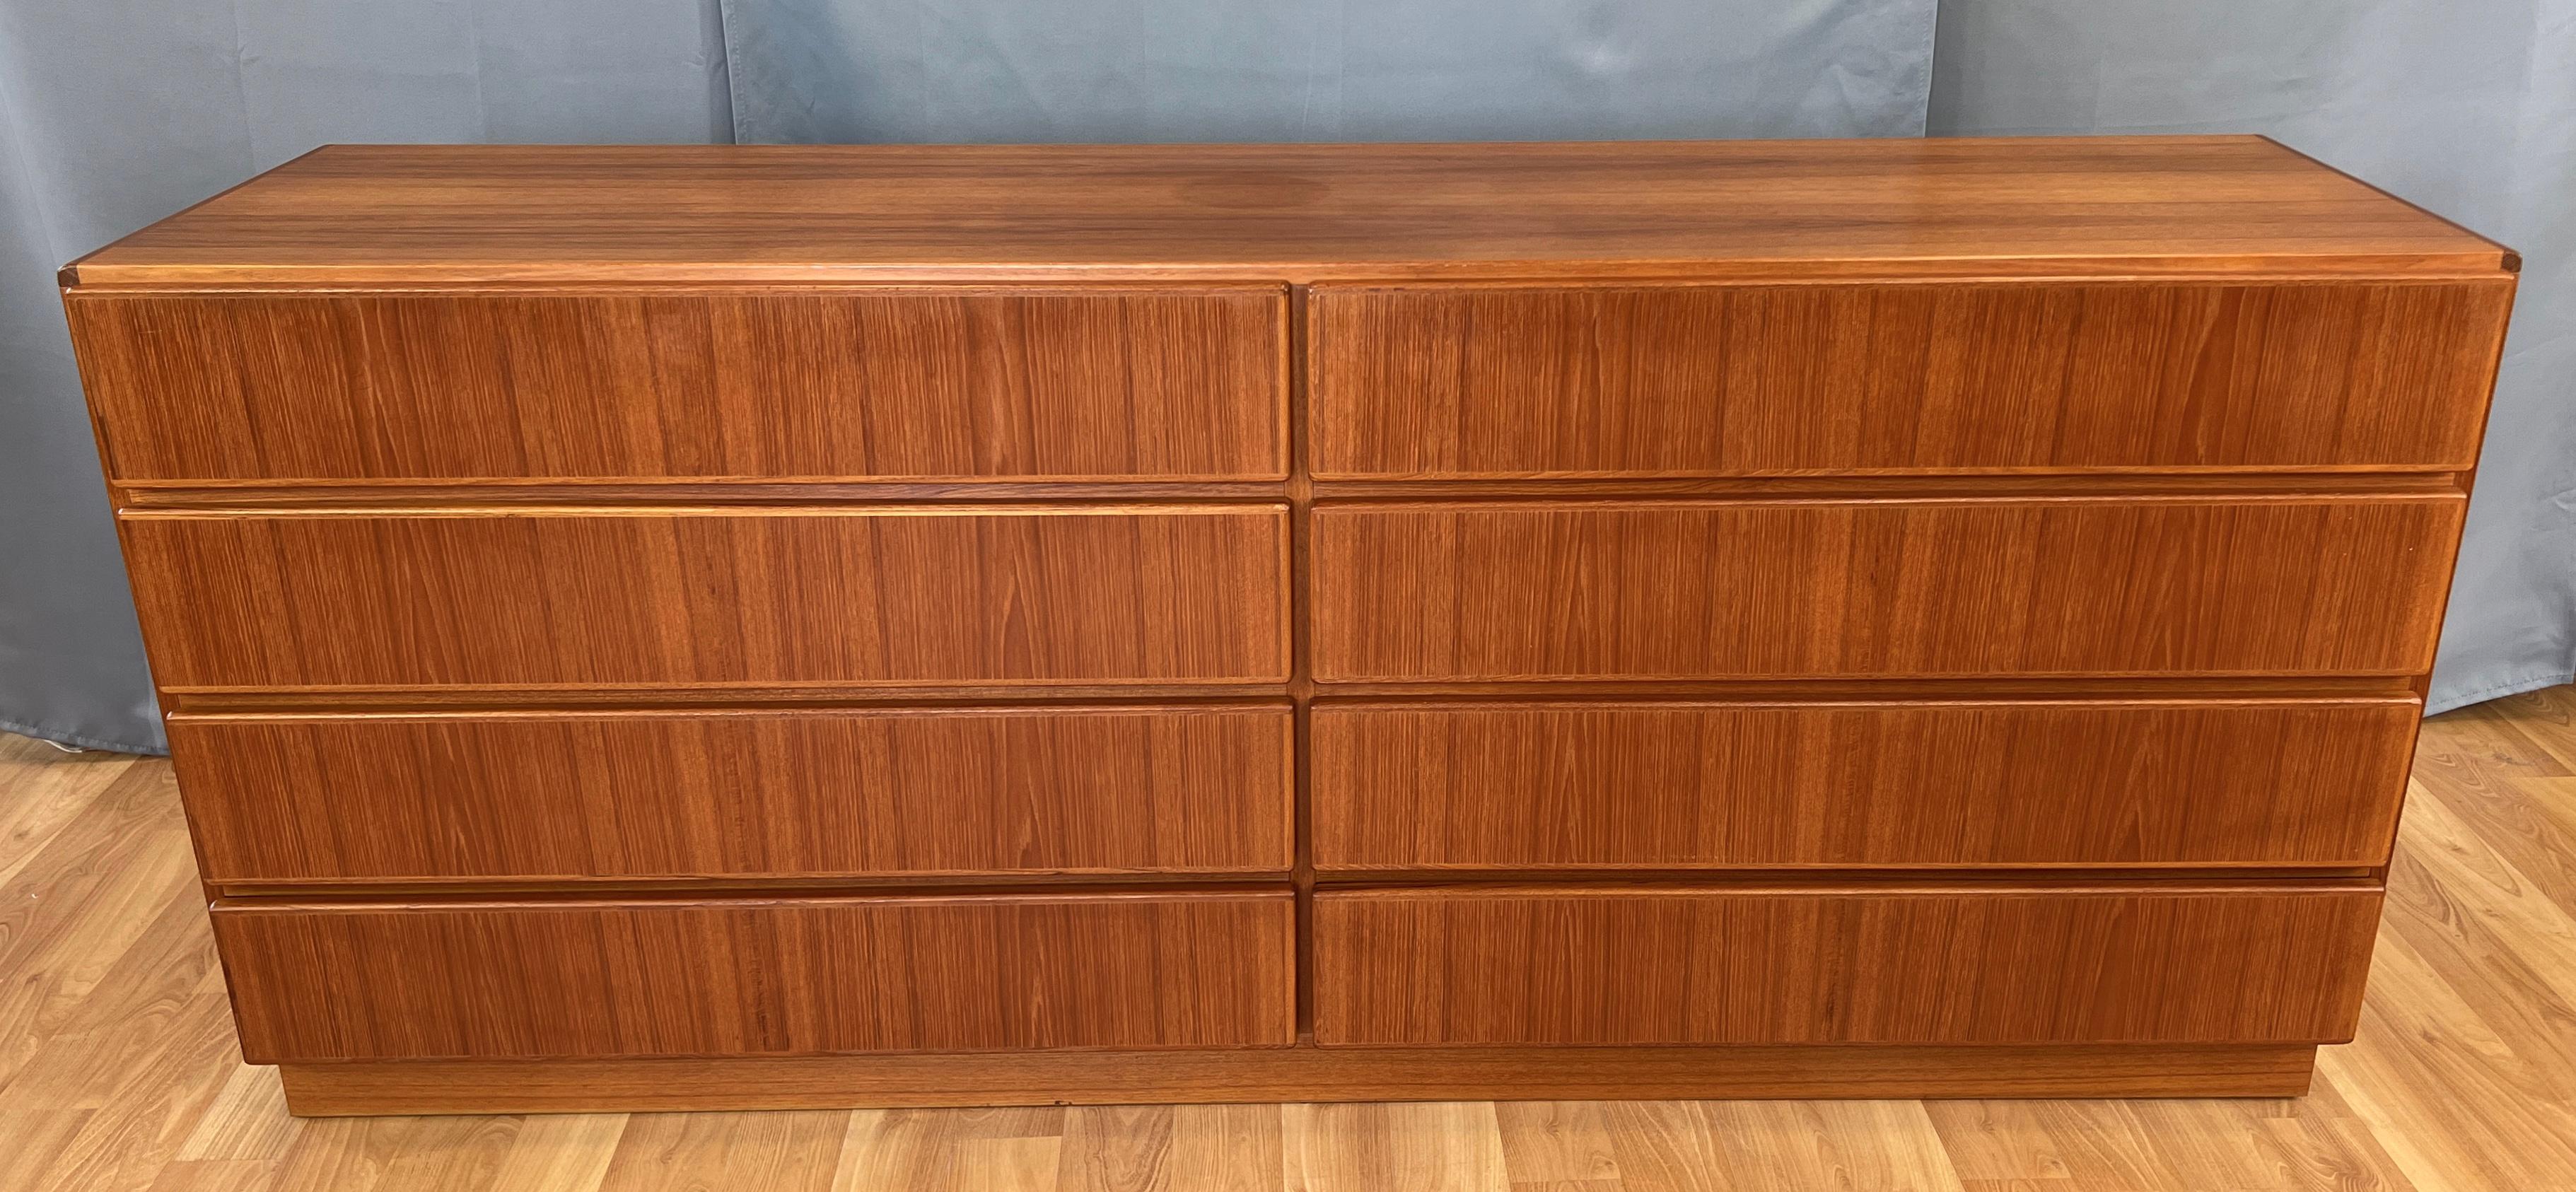 Offered here is a circa 1970s eight drawer Teak danish modern dresser by Komfort.
Has a nice simple clean design, with it's round edges, also finished on it's back side. 
With the eight drawers all the same size it will hold just about everything